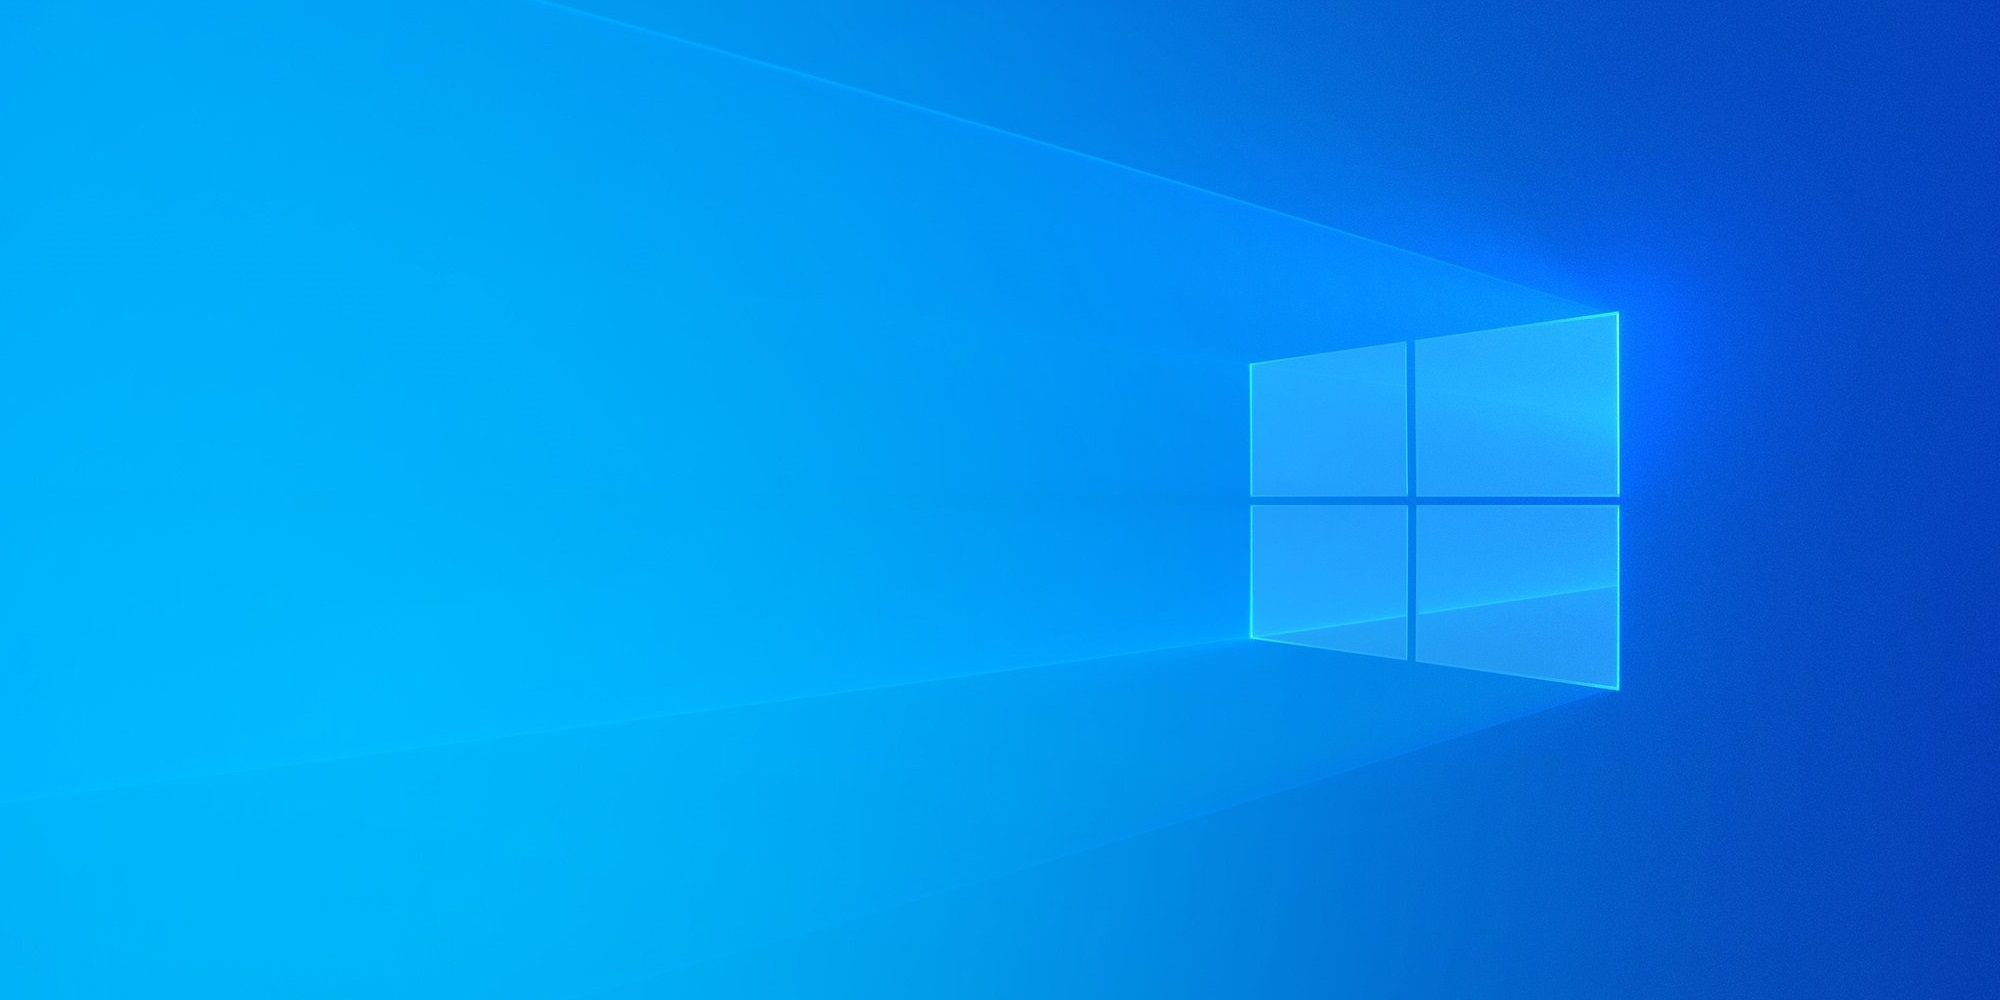 Microsoft isn’t releasing any new Windows review works until after Windows 11 event